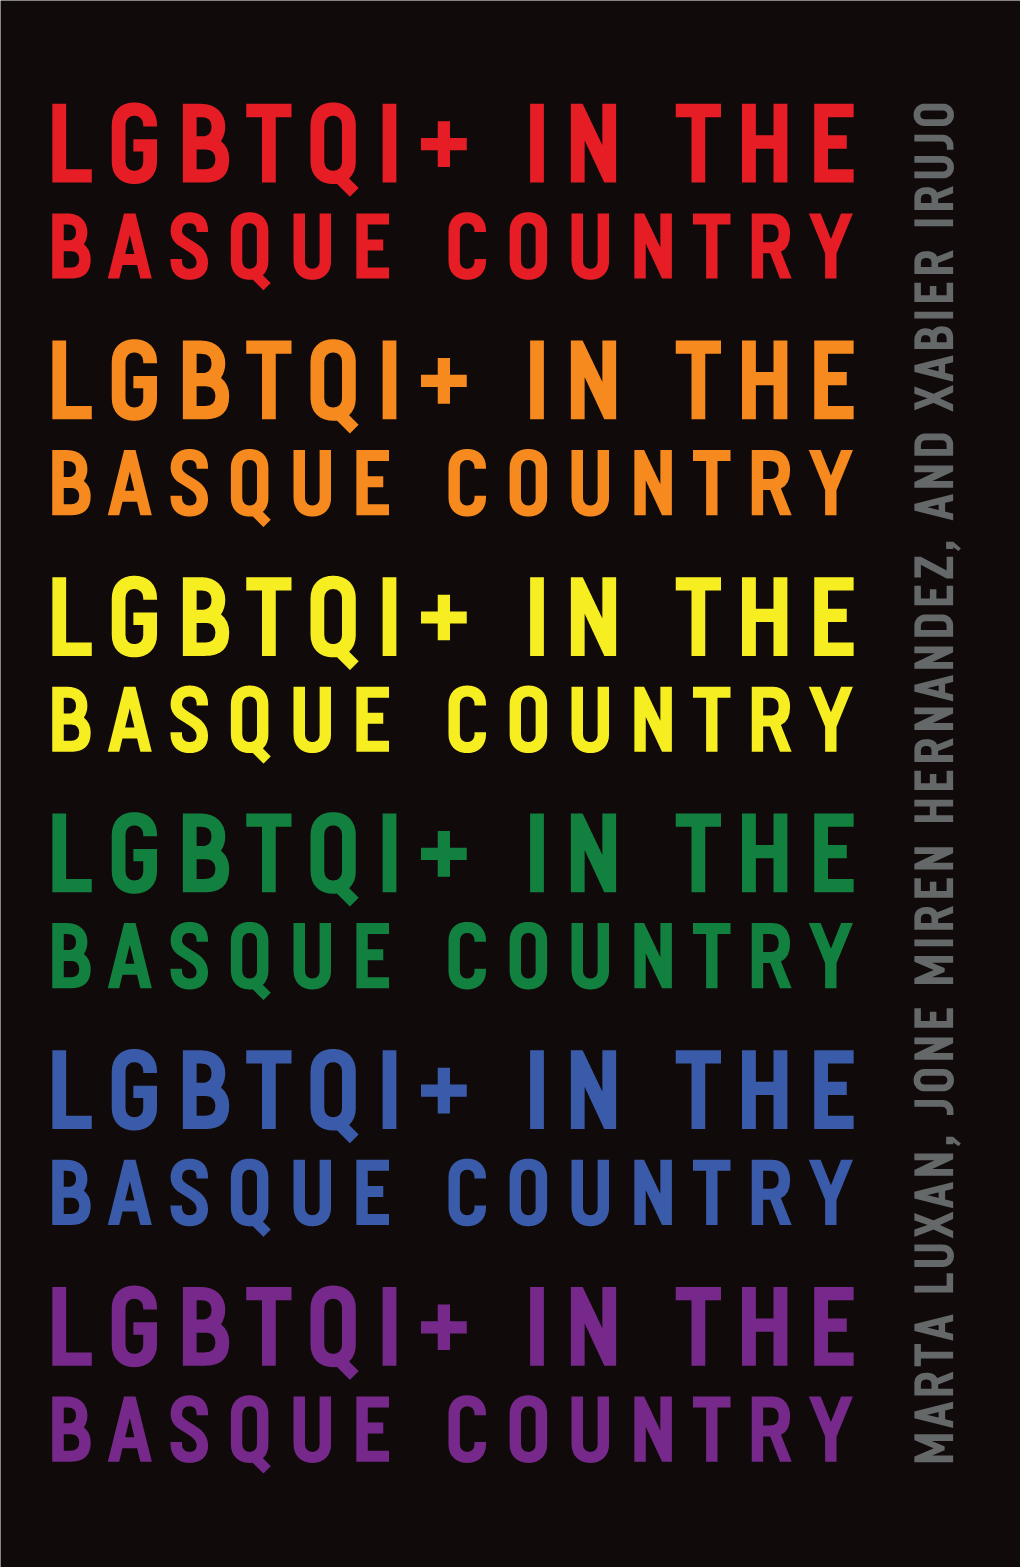 LGBTQIA+ in the Basque Country